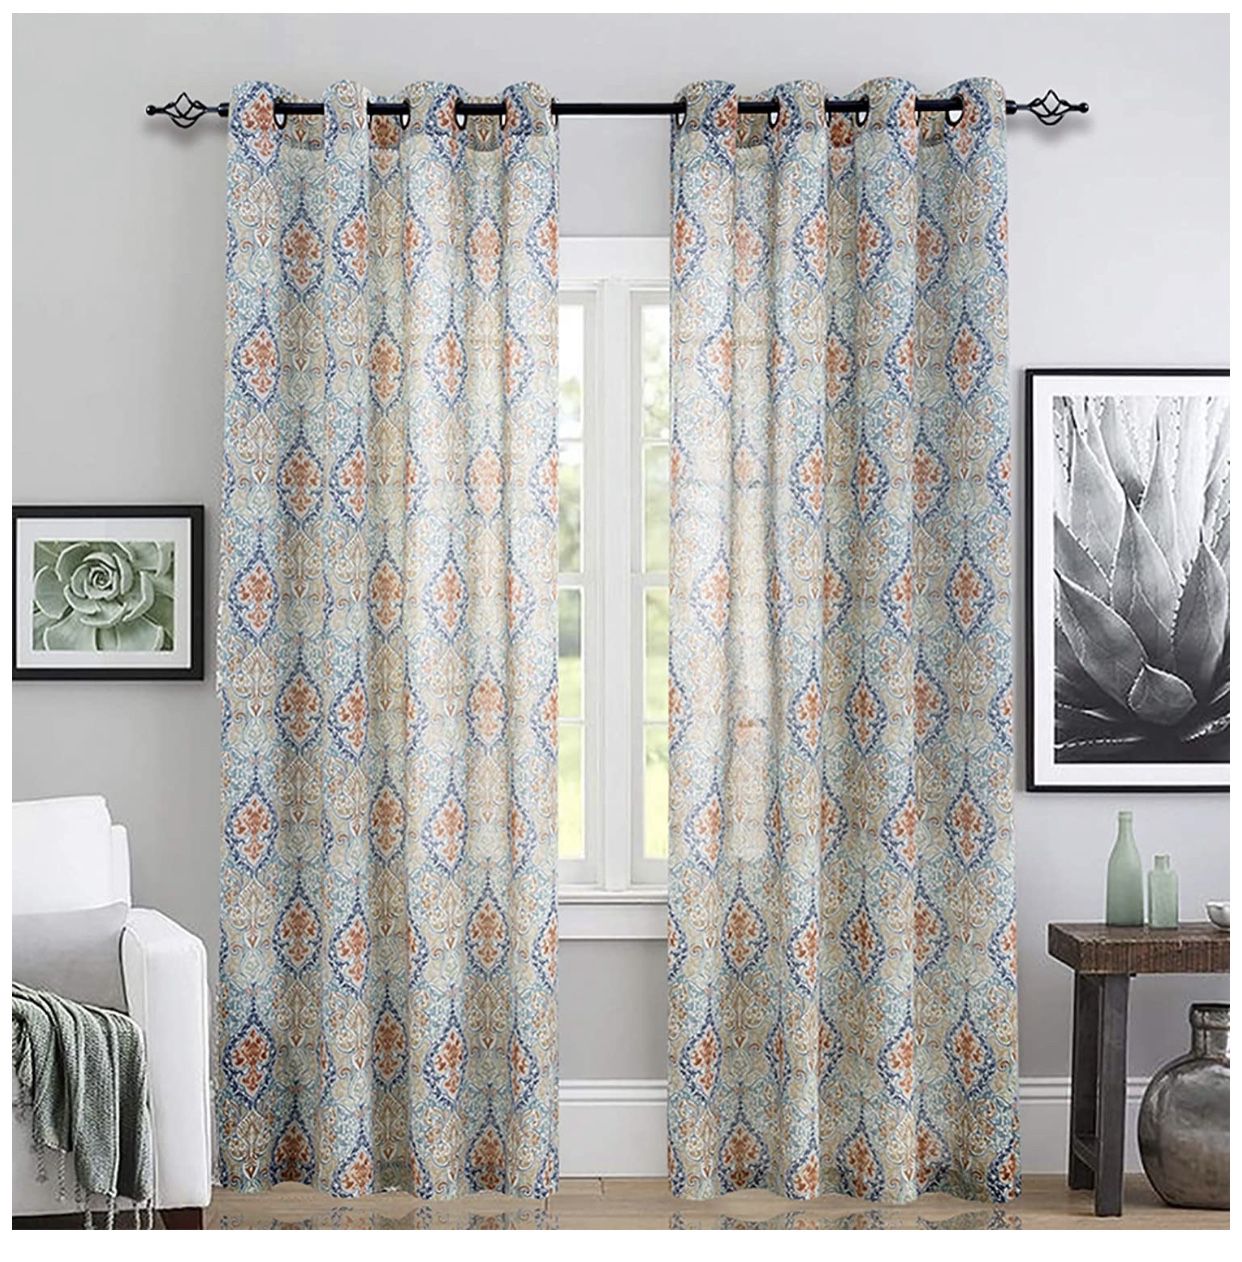 Medallion Linen Blend Curtains for Living Room 84 Inch Length Drapes Damask Pattern Flax Draperies Window Treatments for Sliding Glass Doors Bedroom